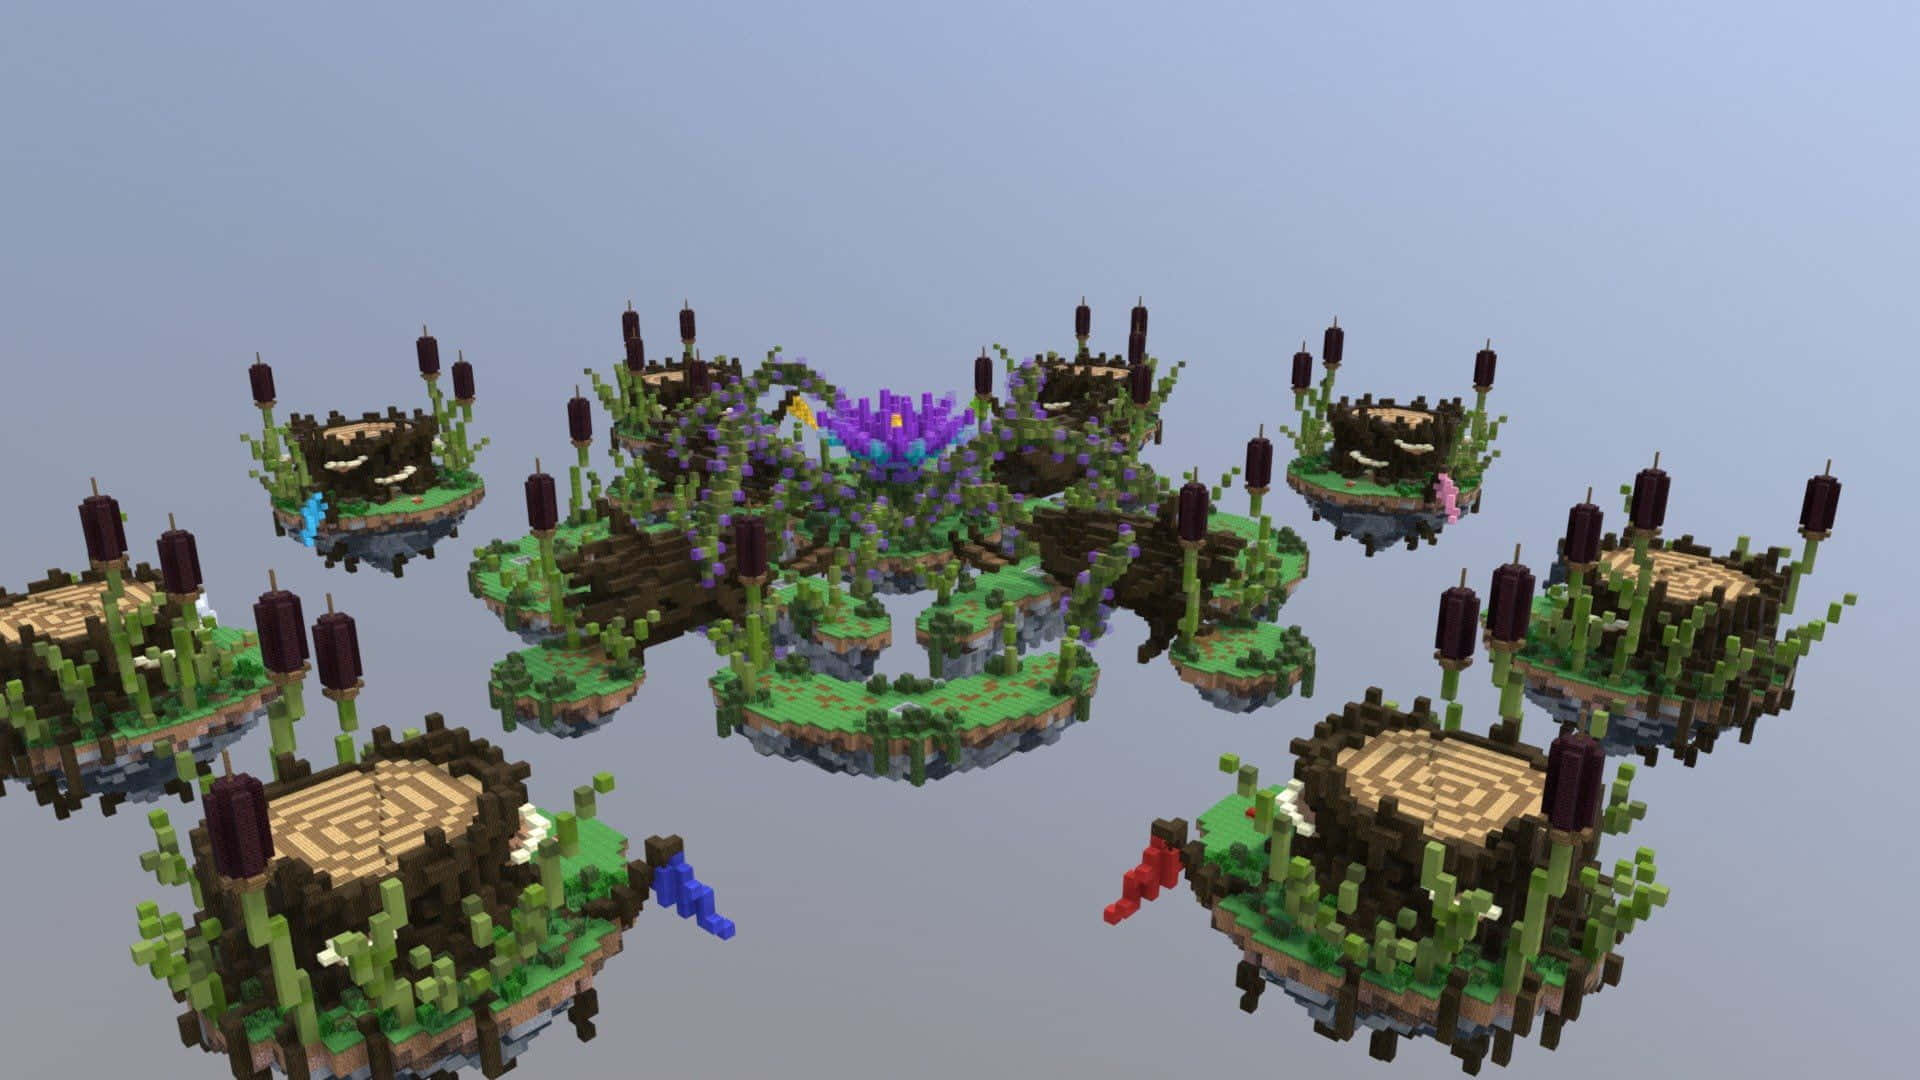 Minecraft Player's Perspective on a 3D Map Wallpaper